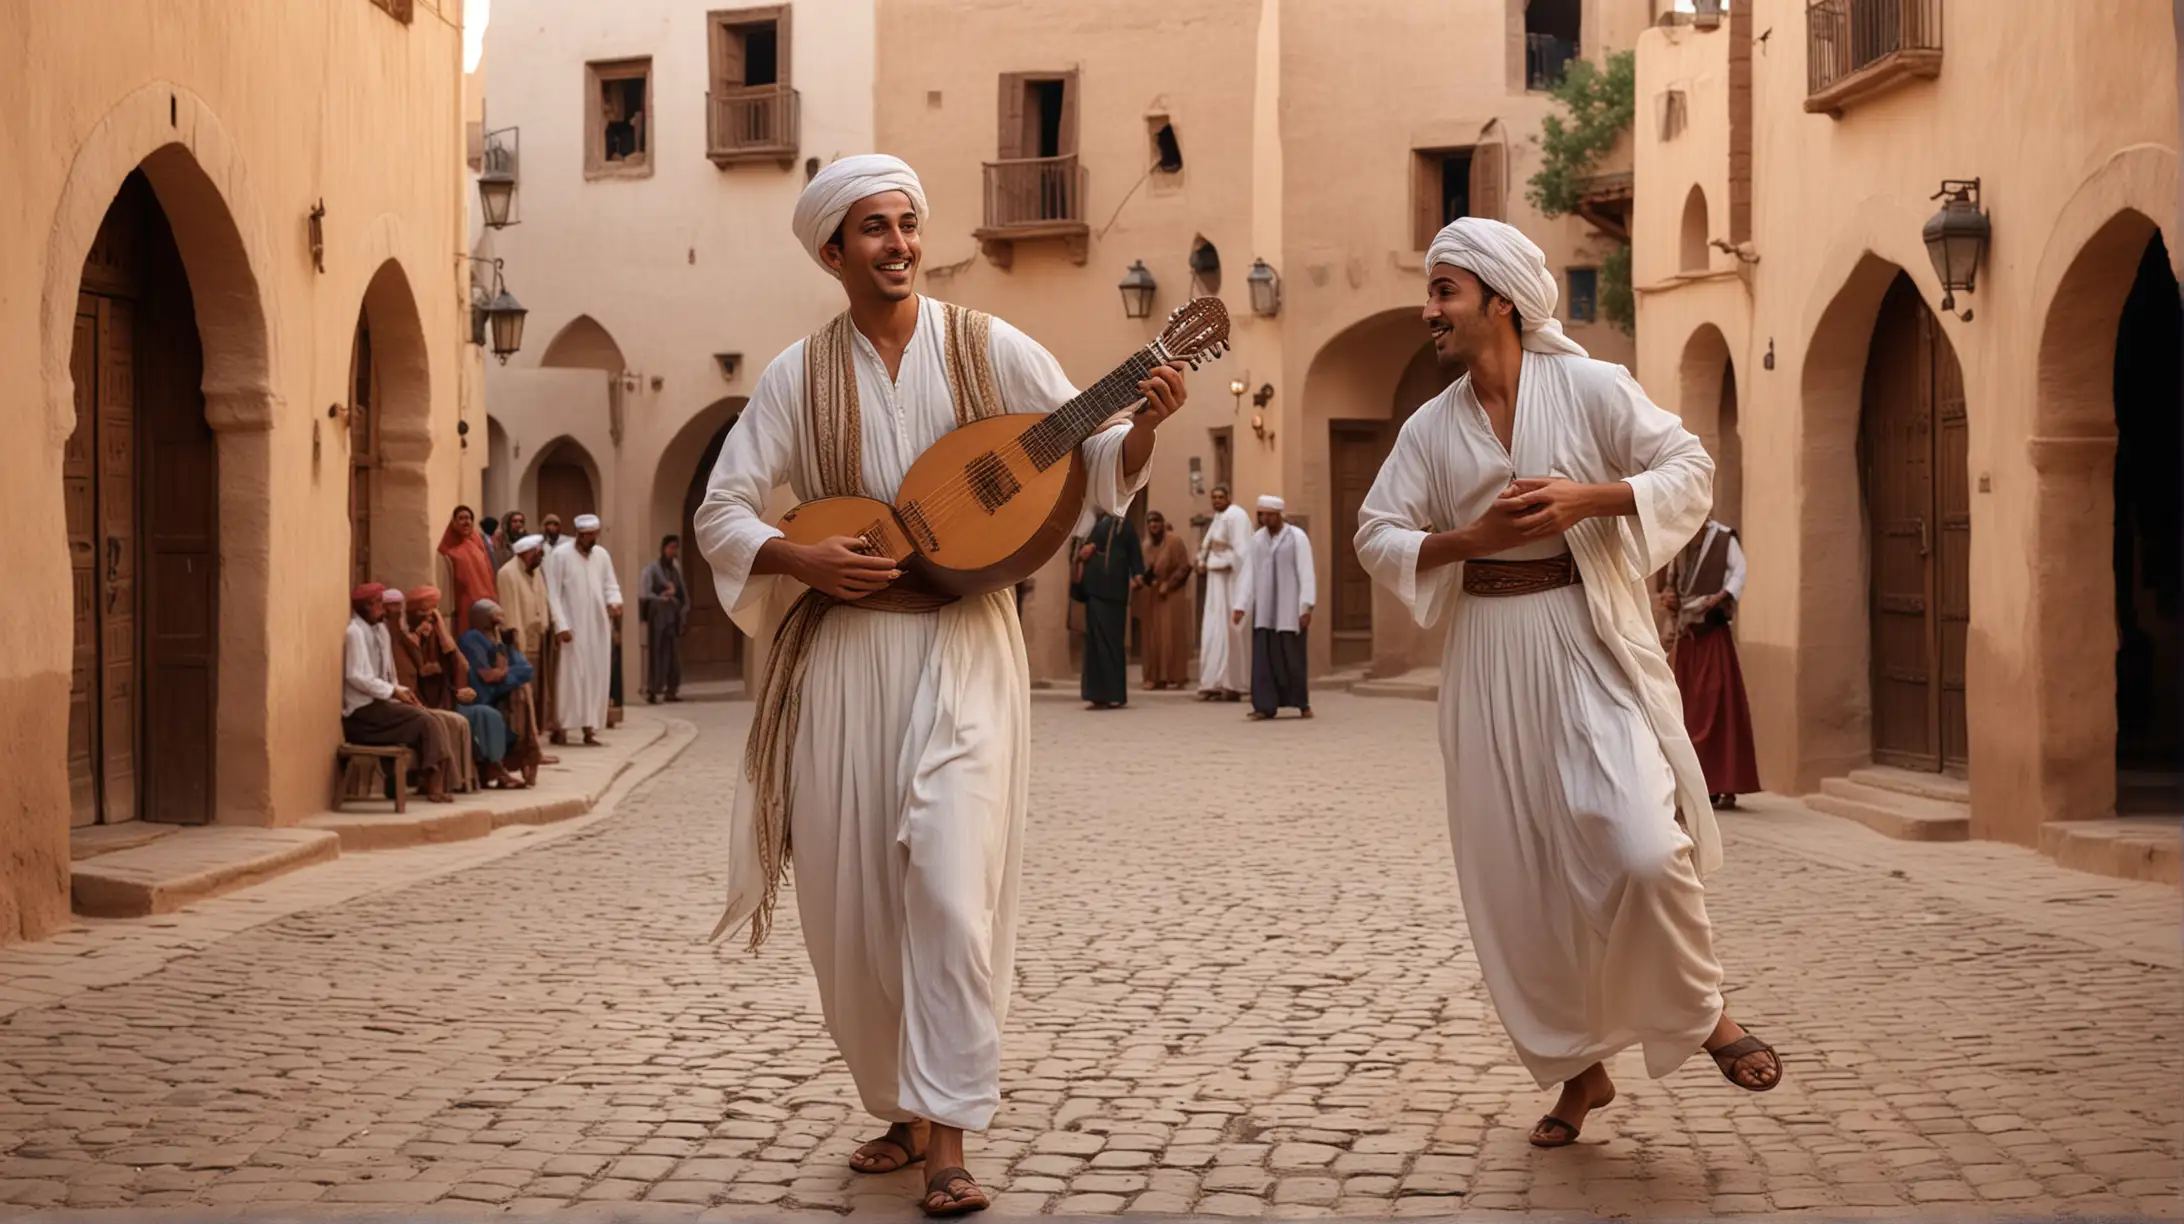 Moroccan Musician Playing Arabian Lute in Traditional Village Square